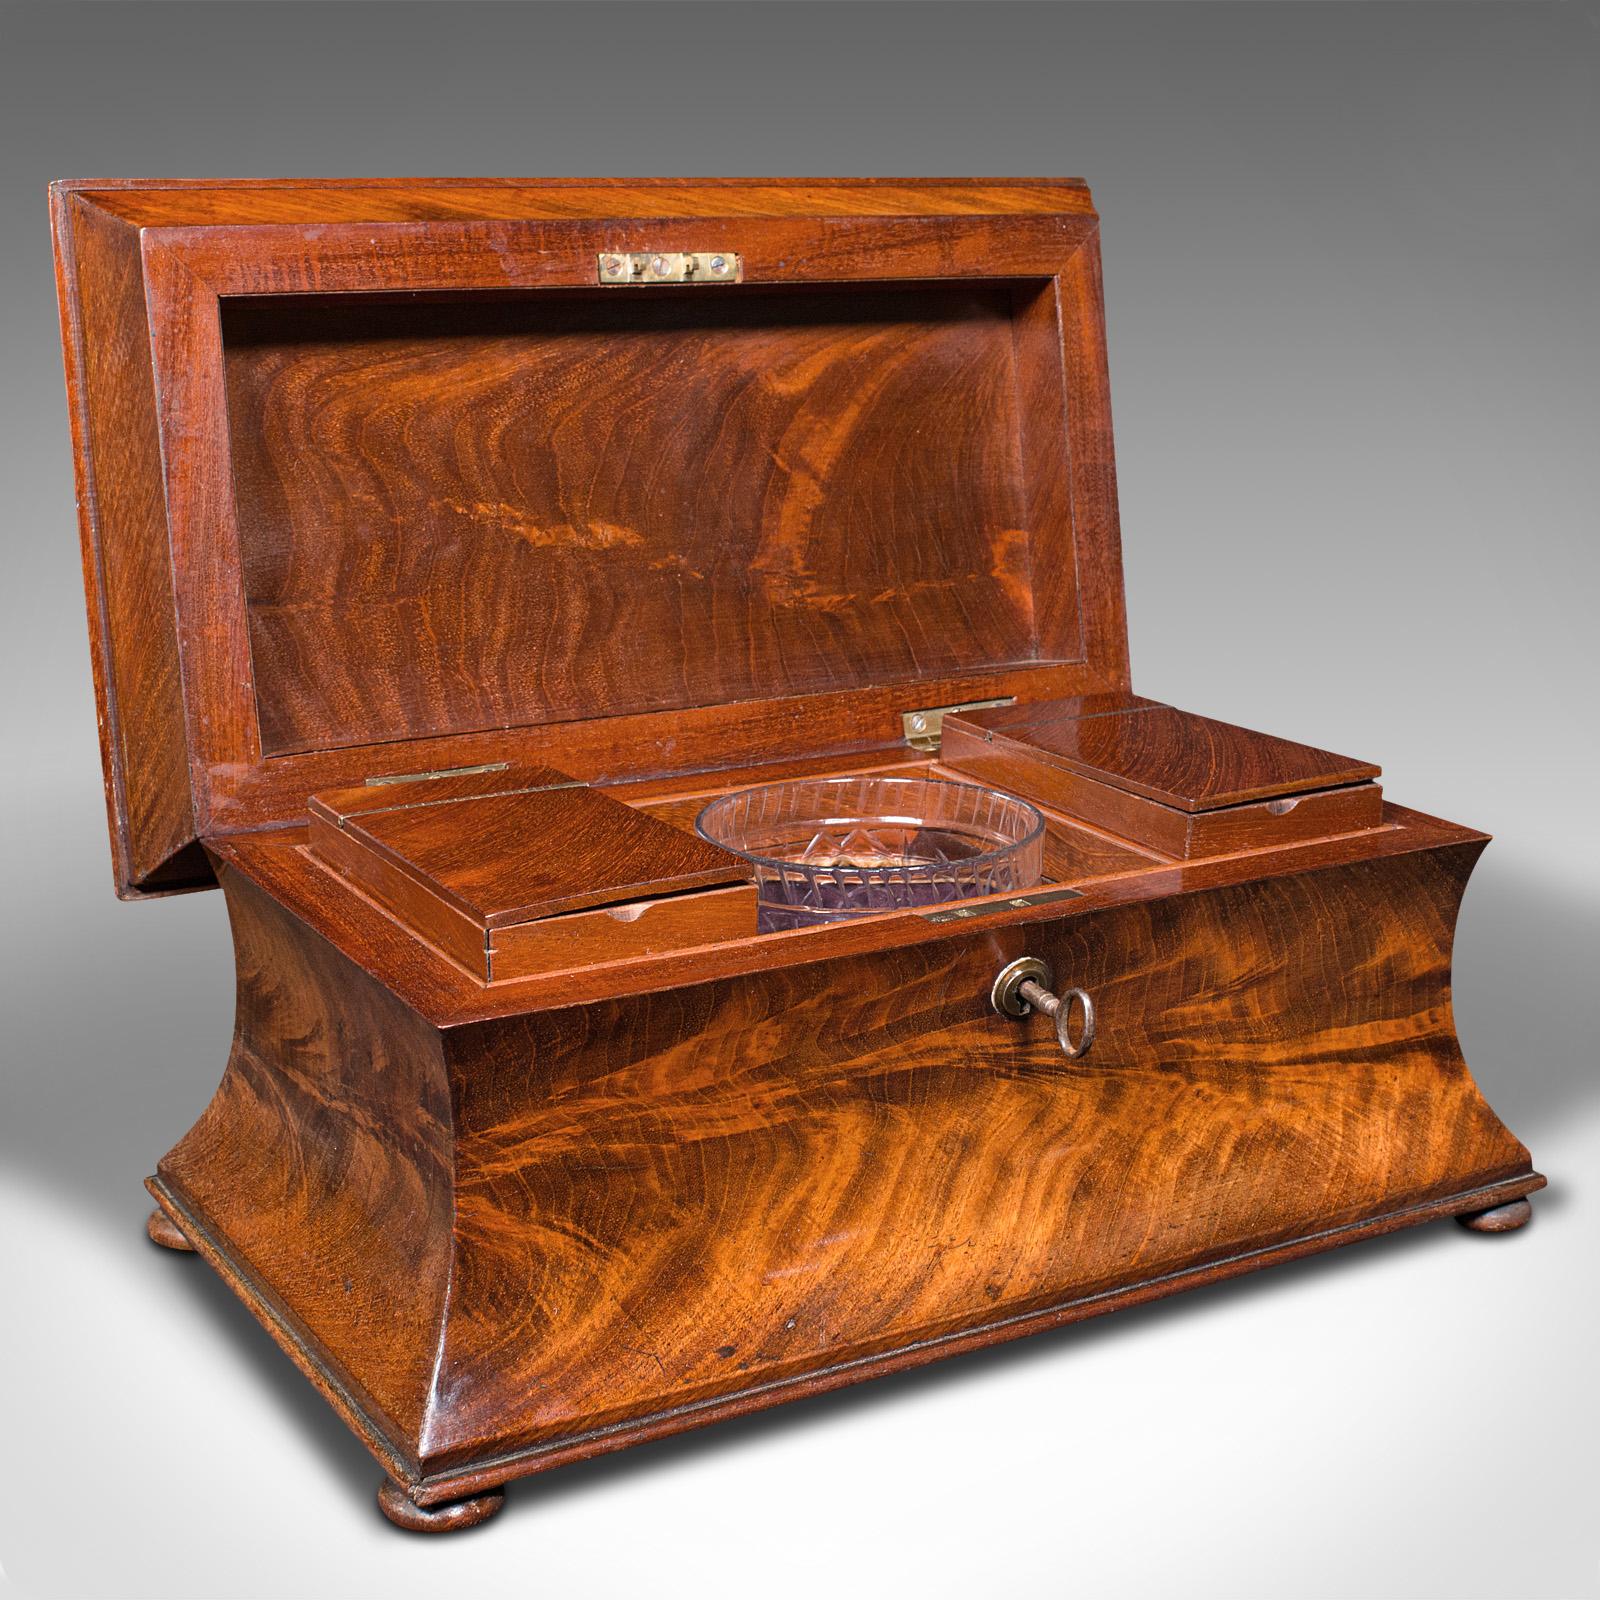 This is an antique drawing room tea caddy. An English, flame mahogany sarcophagus with glass mixer, dating to the Regency period, circa 1820.

Superb craftsmanship with striking decorative appearance
Displays a desirable aged patina and in good